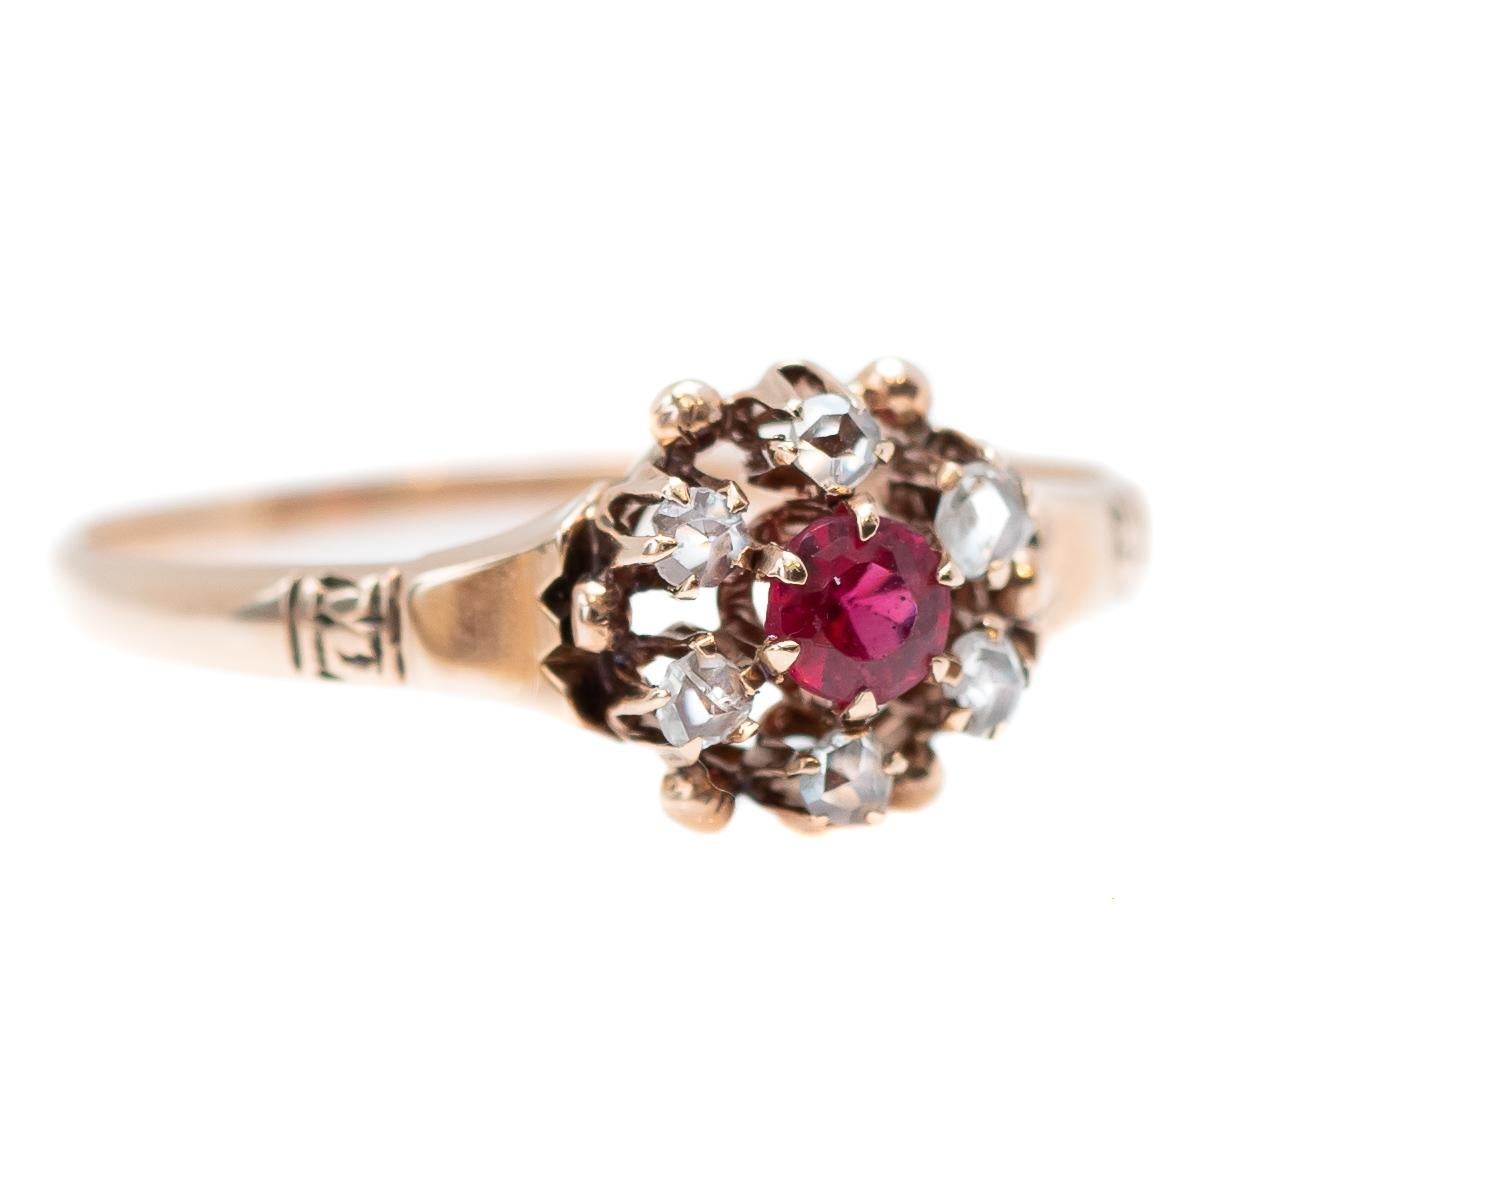 1890s Victorian Era 9 Karat Gold Ring featuring 0.33 Carat Diamond Halo and Ruby 

Features:
Floral Design
0.33 carat total Gemstones
Pinkish Red Ruby Center Stone, 6-prong set 
Old Mine Diamond Halo, 5-prong set side stone

Ring measures